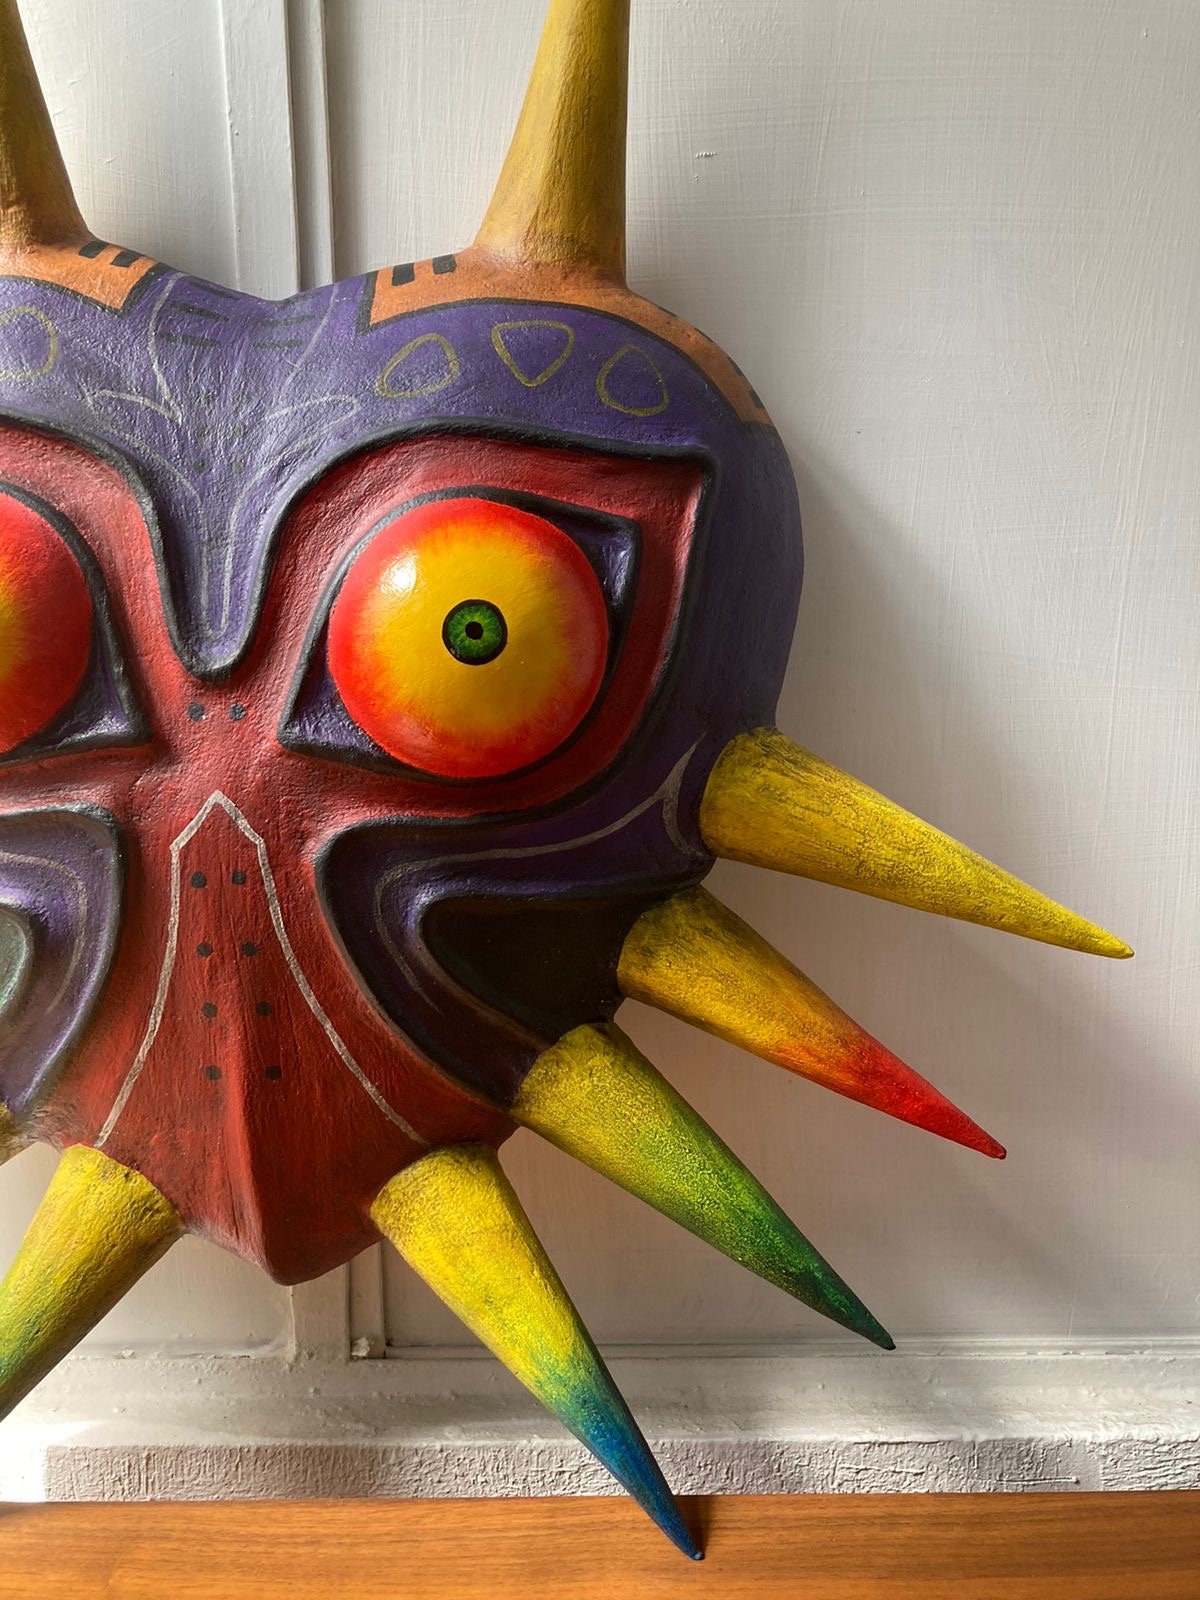 The Legend of Zelda: Majora's Mask - This unique mask holds a special significance due to its intricate design and the artistry involved